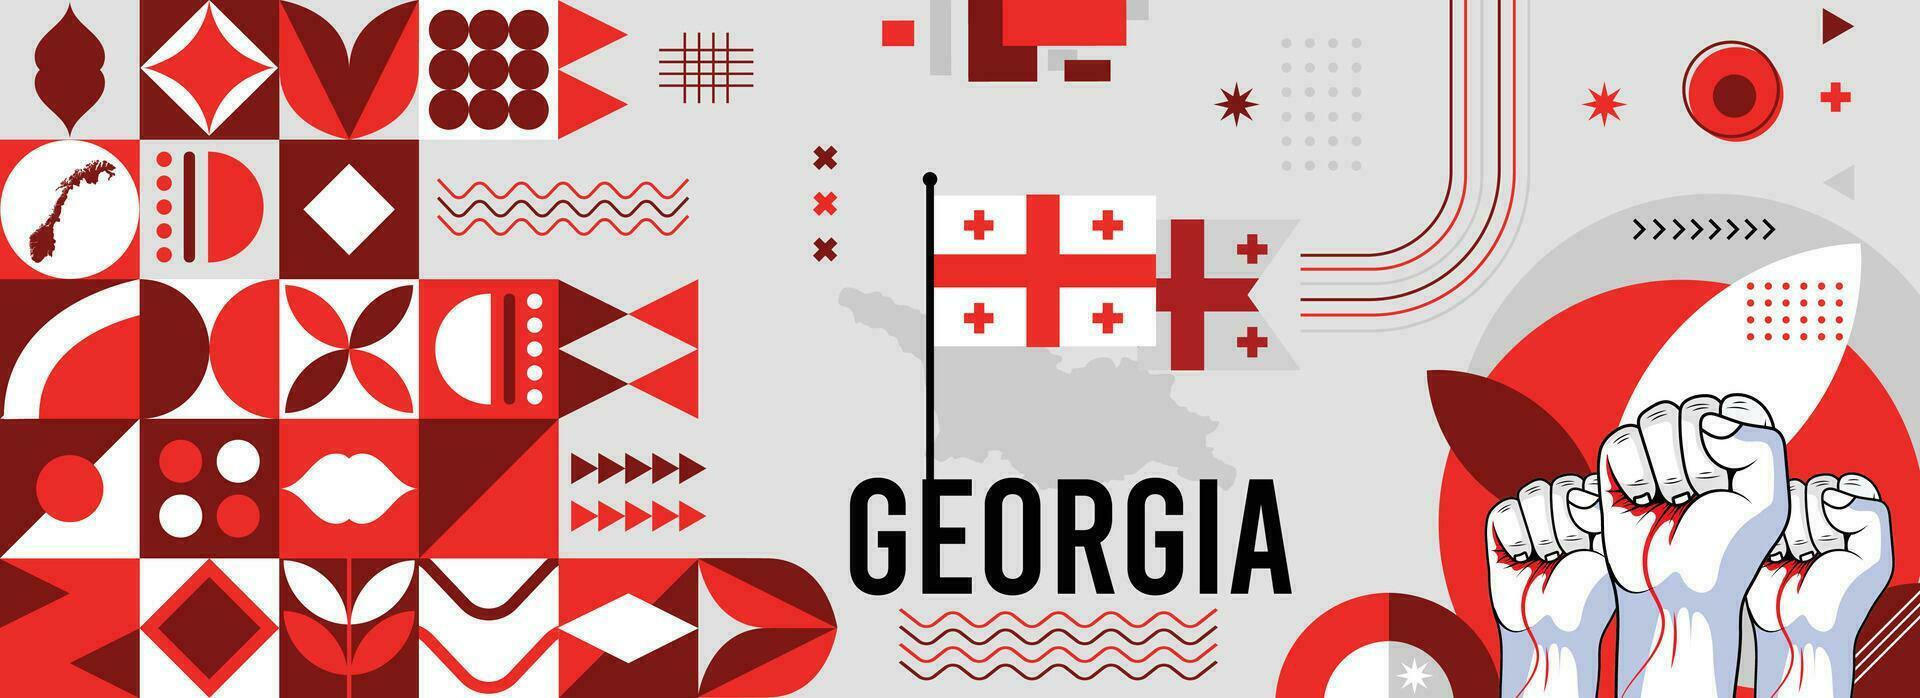 Georgia national or independence day banner for country celebration. Flag and map of Georgia with raised fists. Modern retro design with typorgaphy abstract geometric icons. Vector illustration